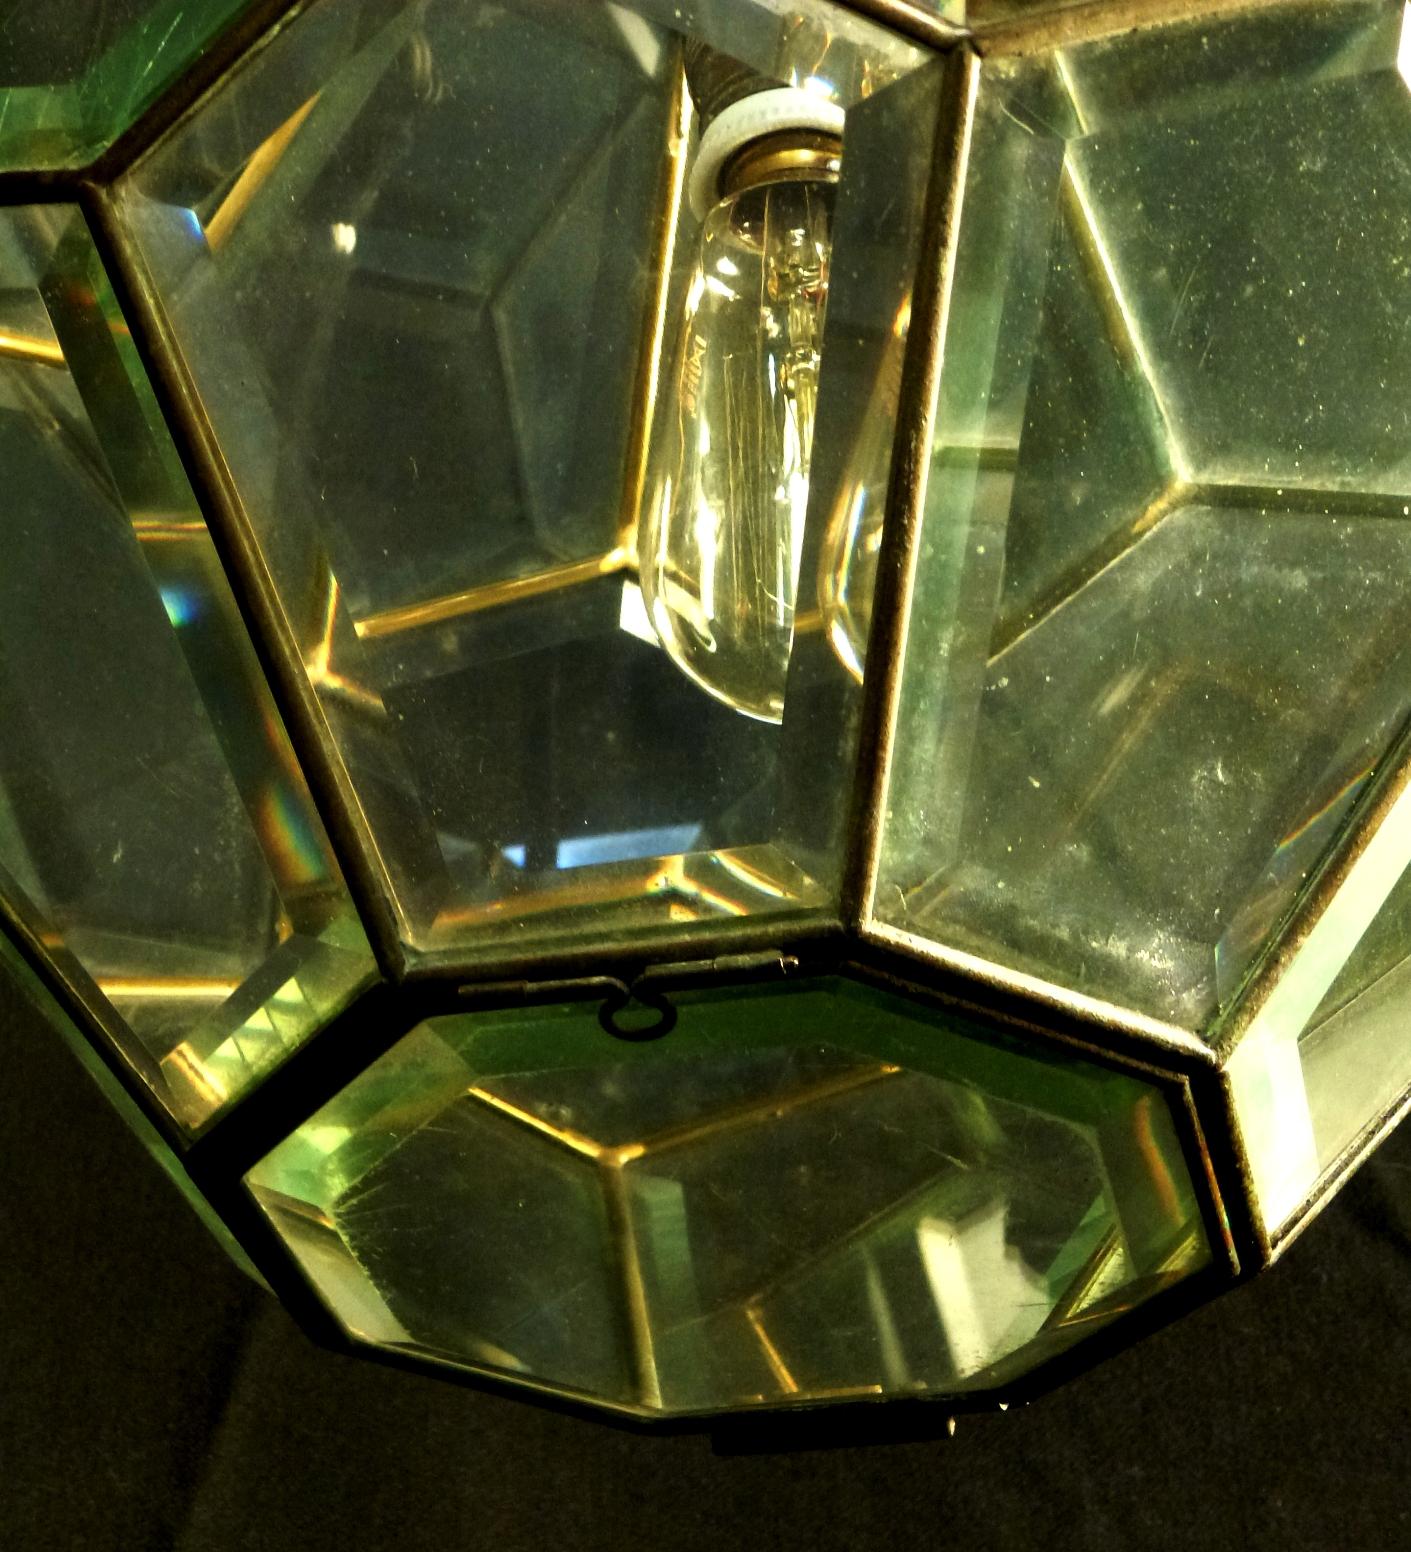 Pentagon Beveled Glass Geometric Ceiling Light in Adolf Loos Style, Early 1900s For Sale 7